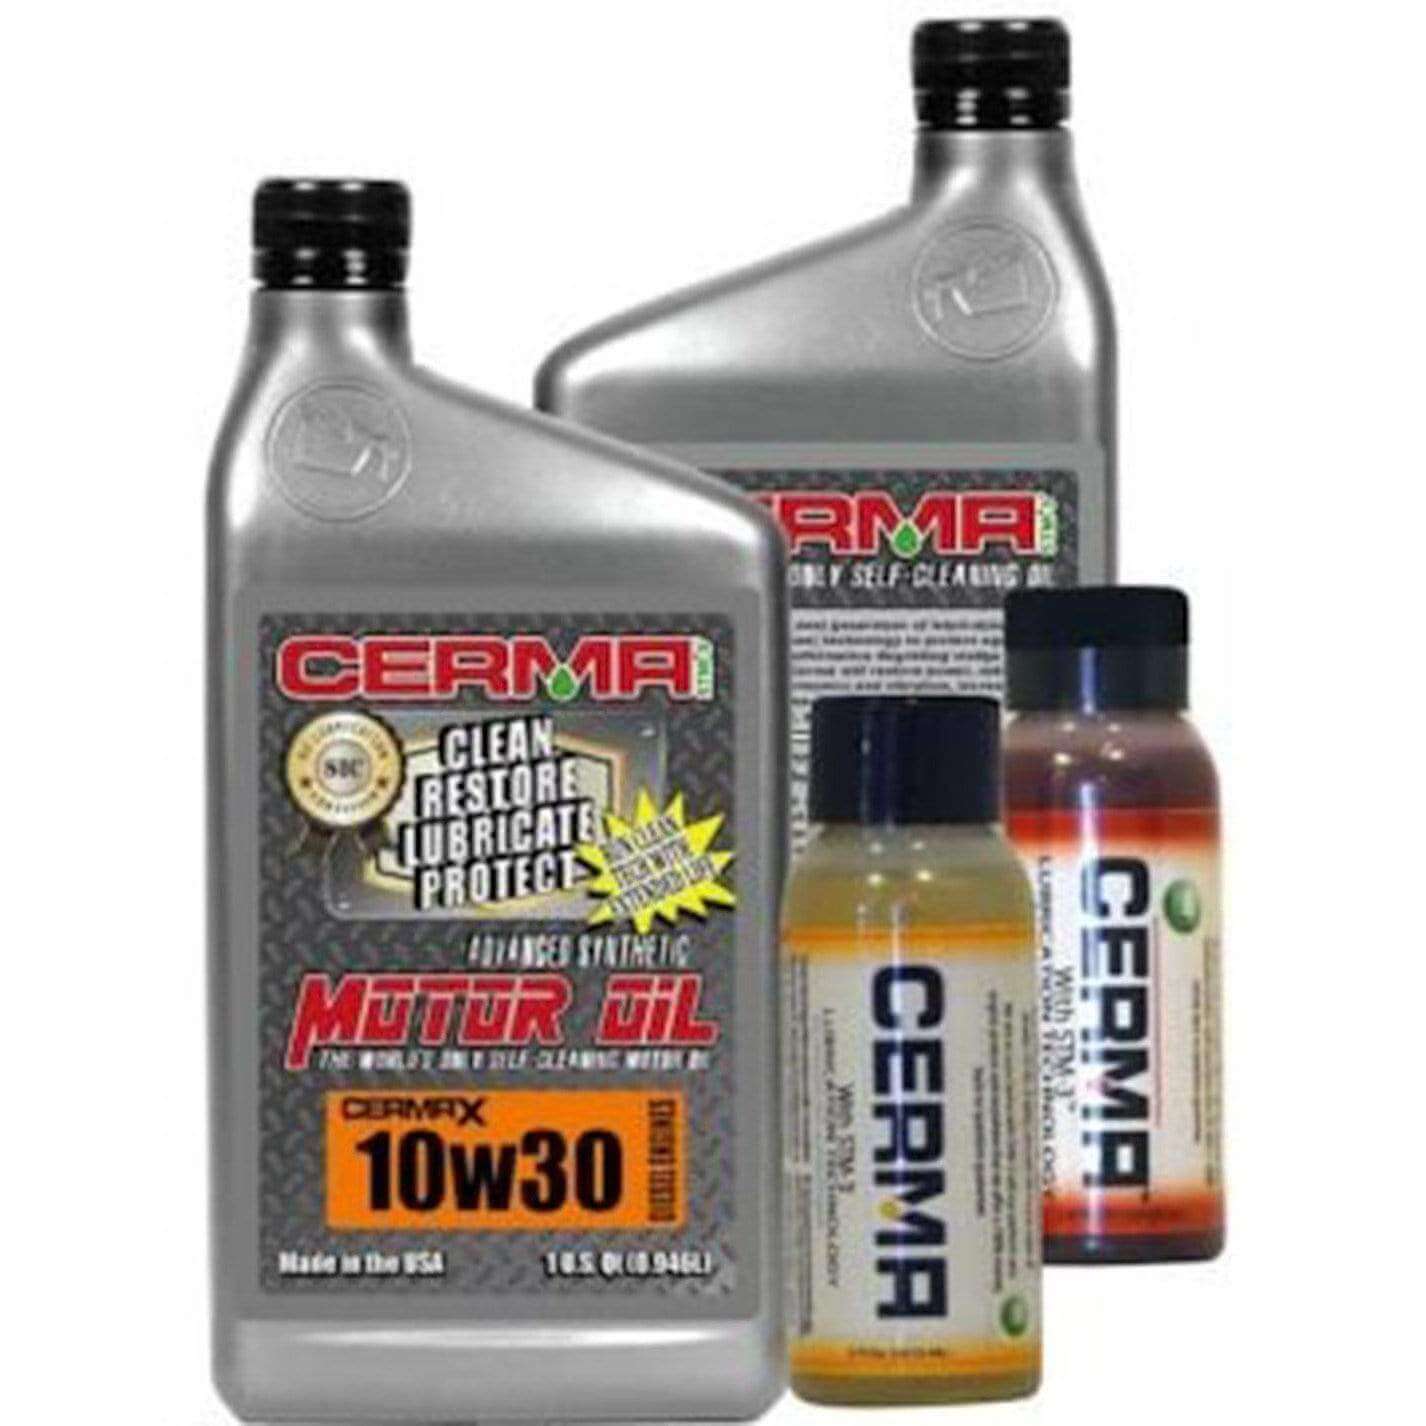 Cermax Diesel Ceramic Synthetic Oil Value Package for 1 To 2.8 Liter Engines at $191.4 only from cermatreatment.com